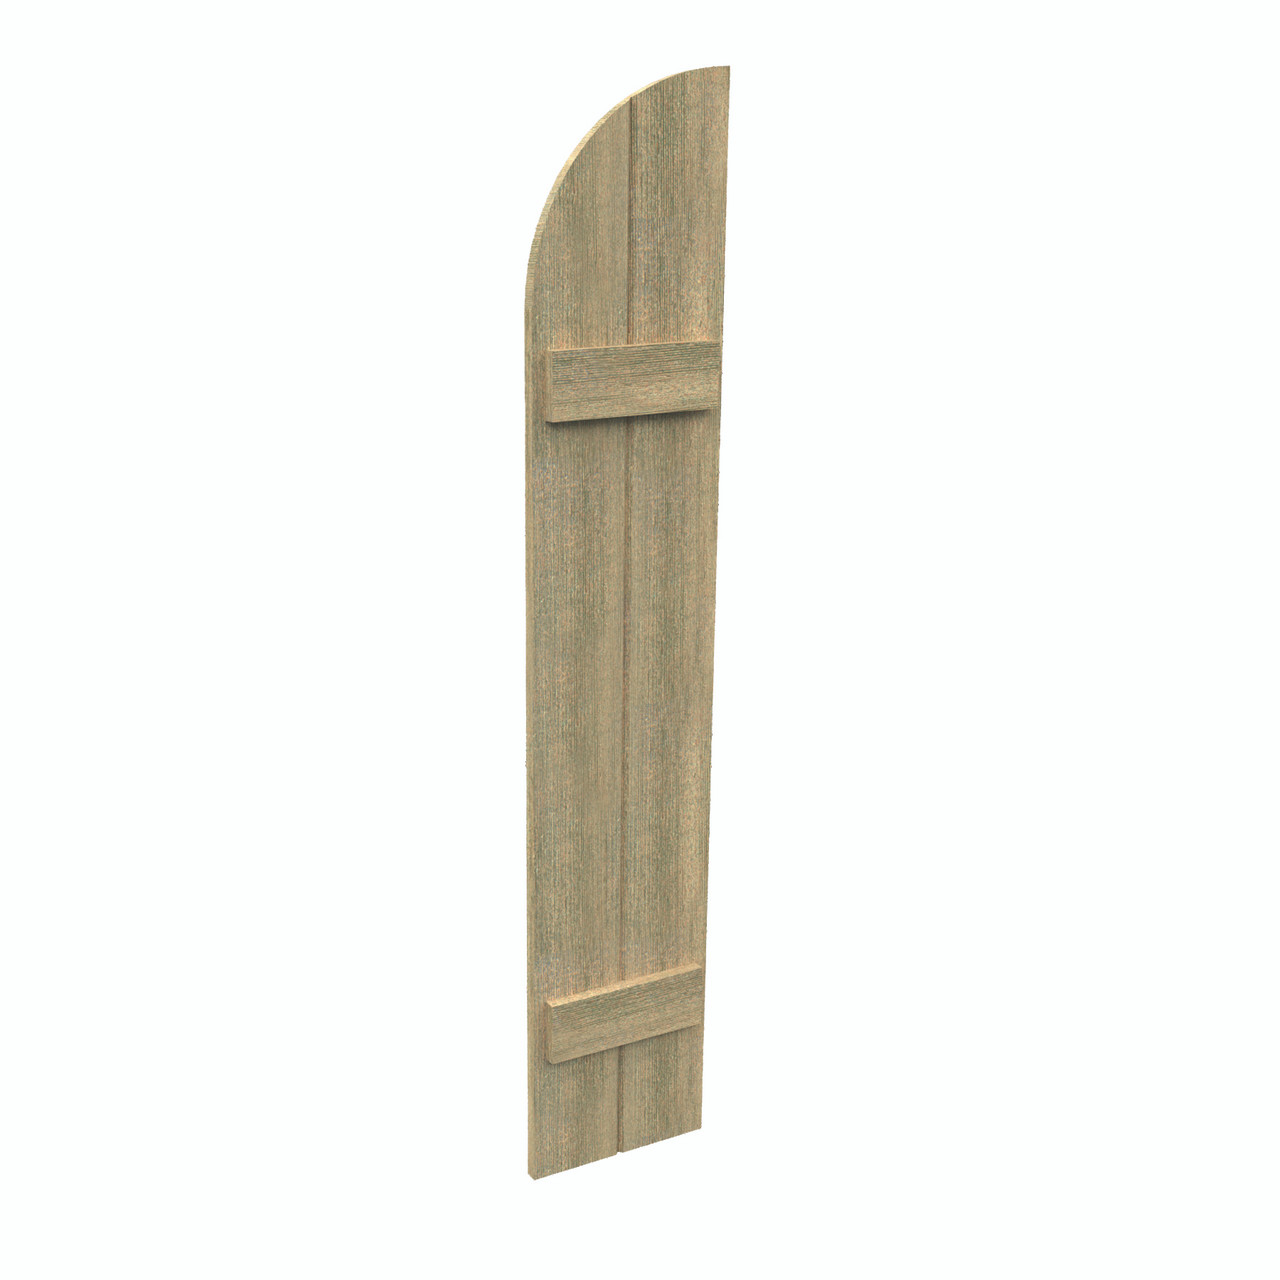 12 inch by 70 inch Quarter Round Shutter with 2-Boards